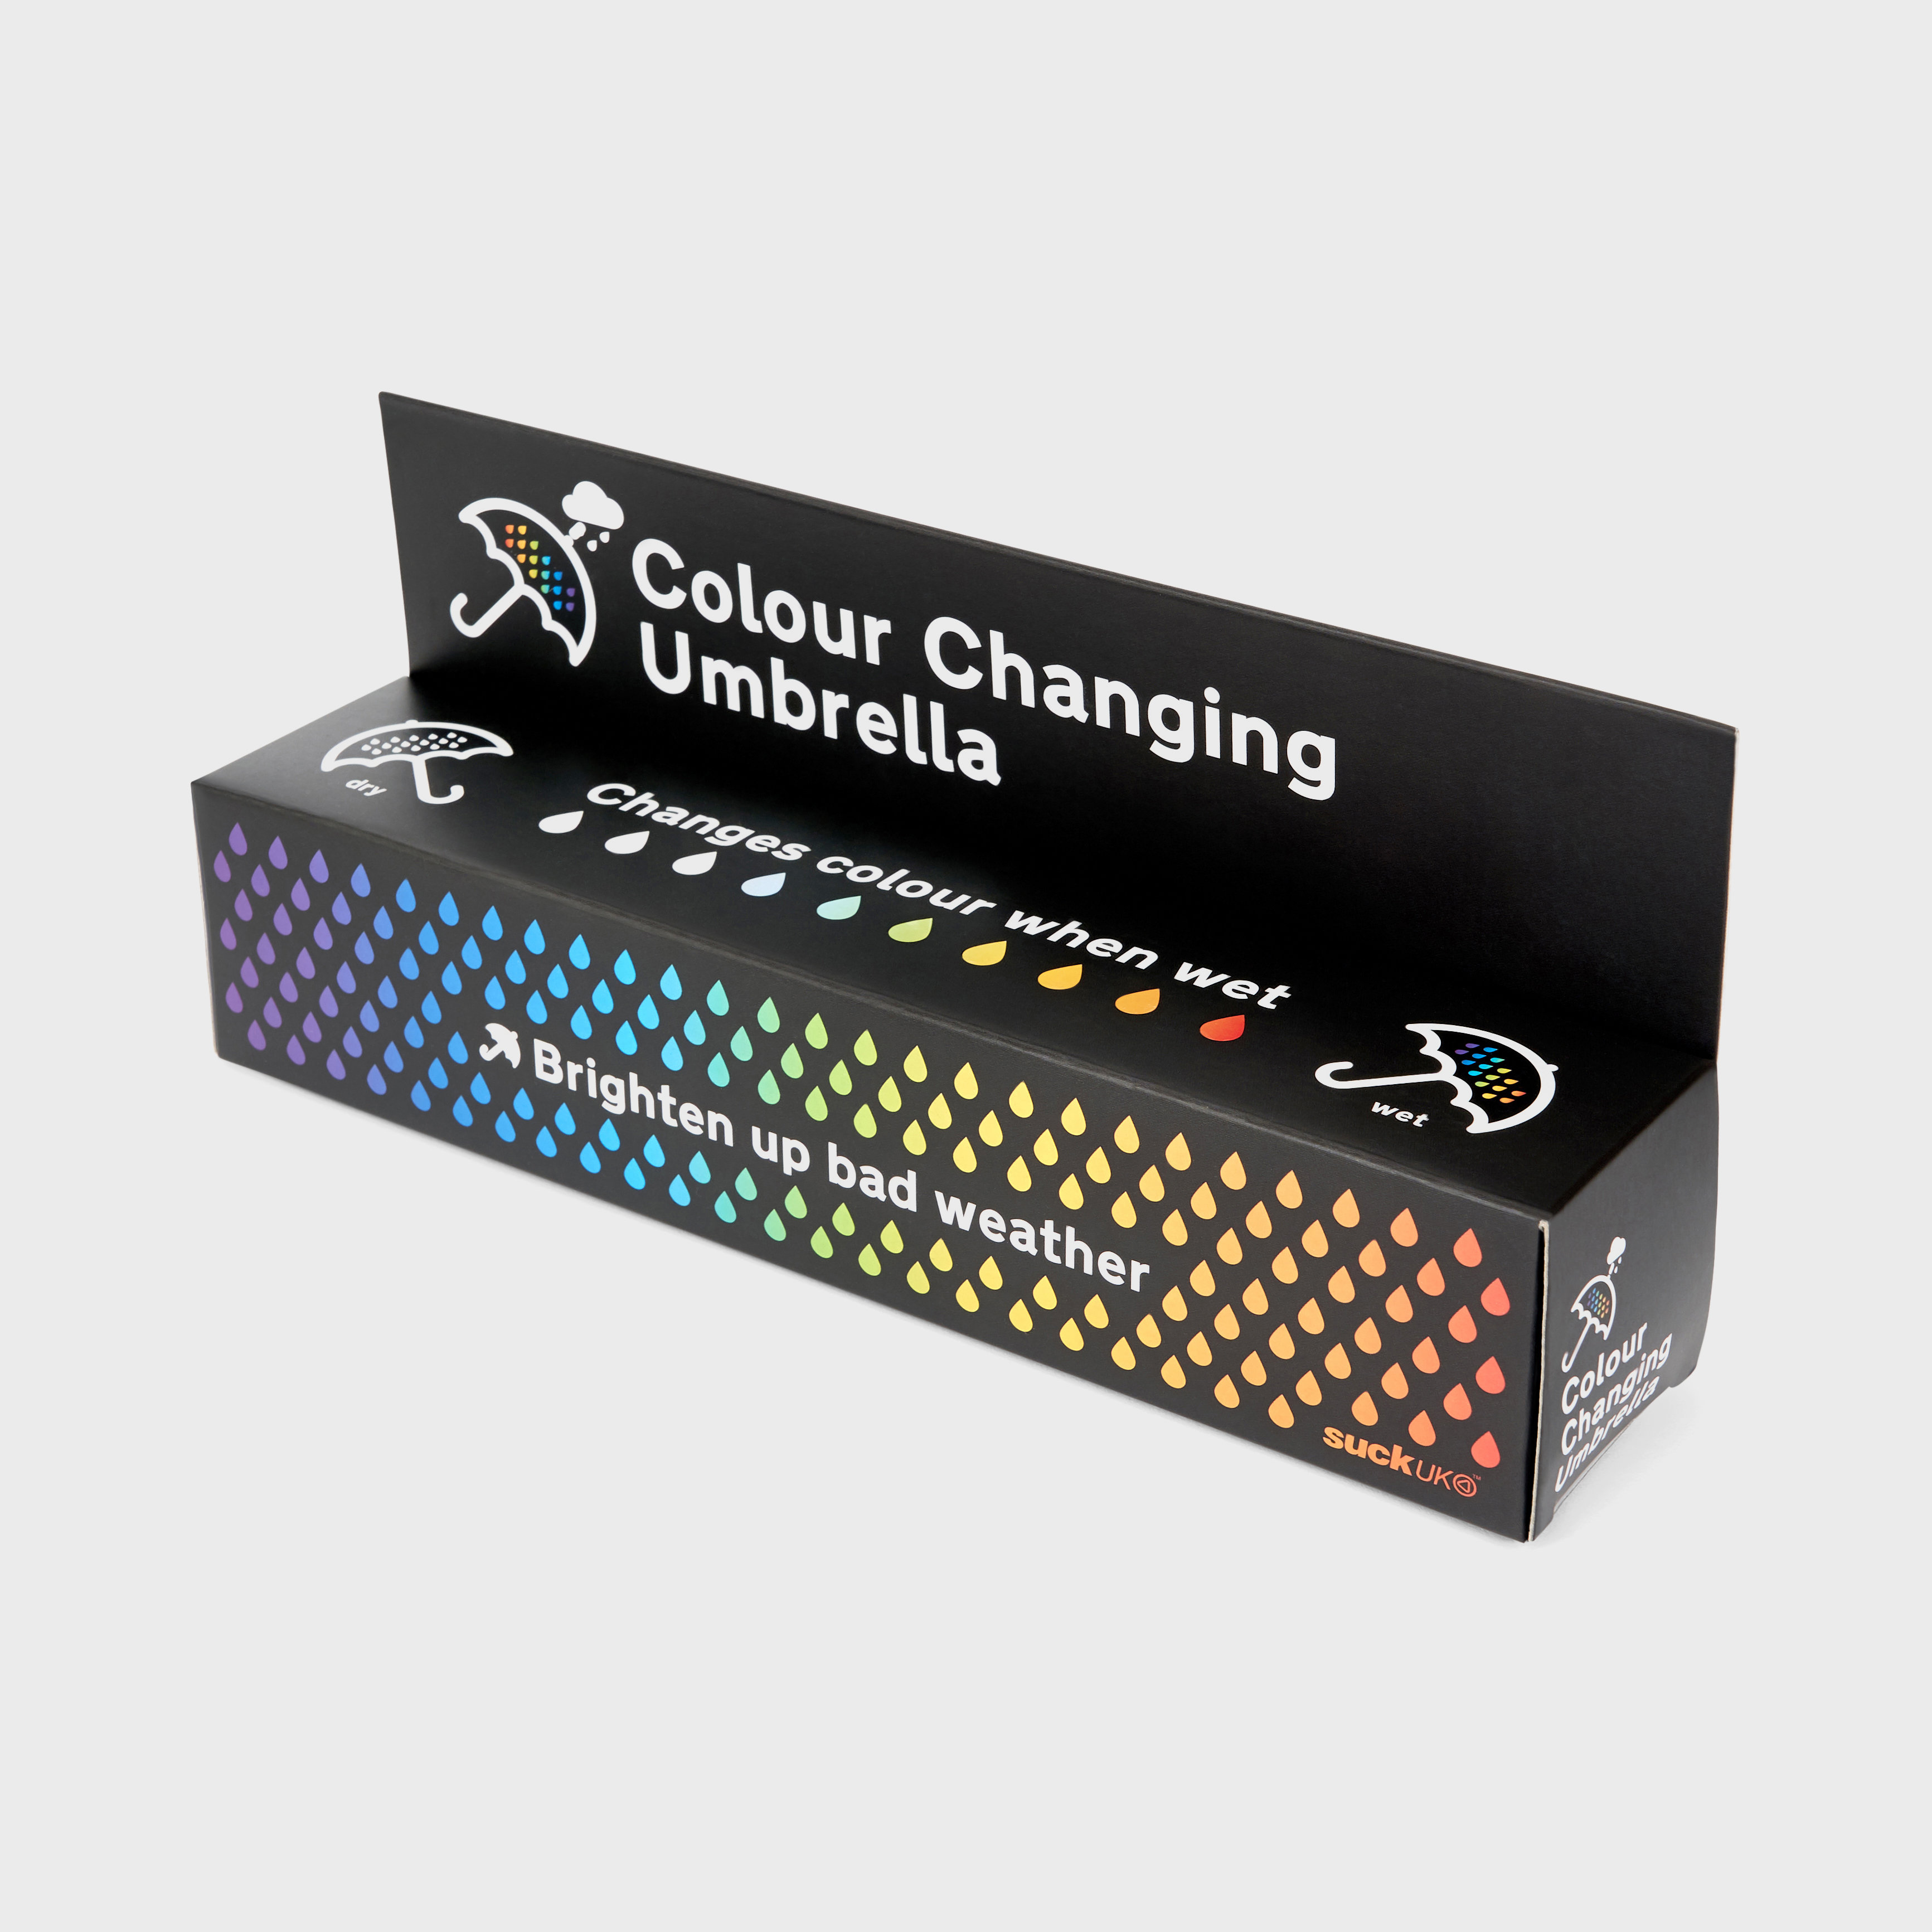 Packaging for colour changing umbrella - black box